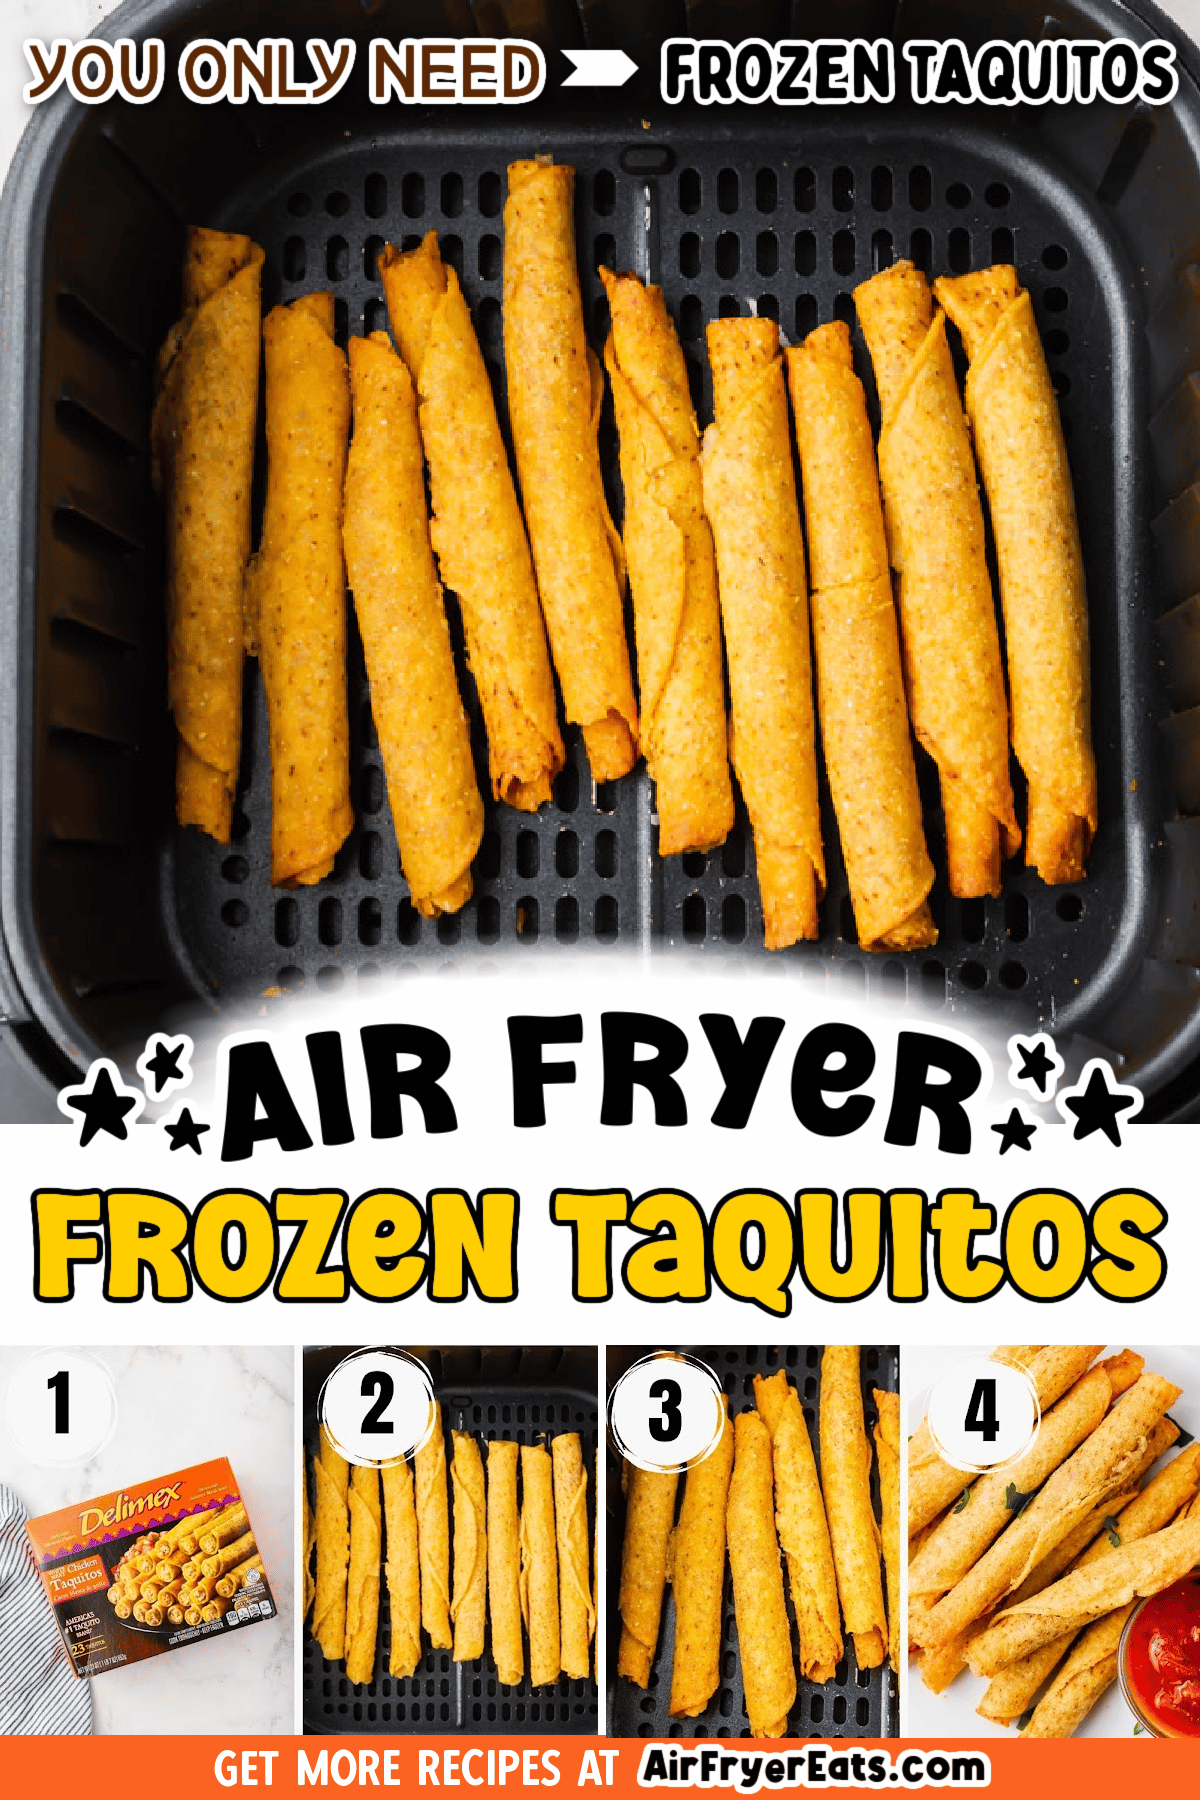 Hot and delicious, Frozen Taquitos in the Air Fryer are ready in half the time as the oven and crispier than the microwave. Learn how to make air fryer frozen taquitos with these simple instructions. via @vegetarianmamma